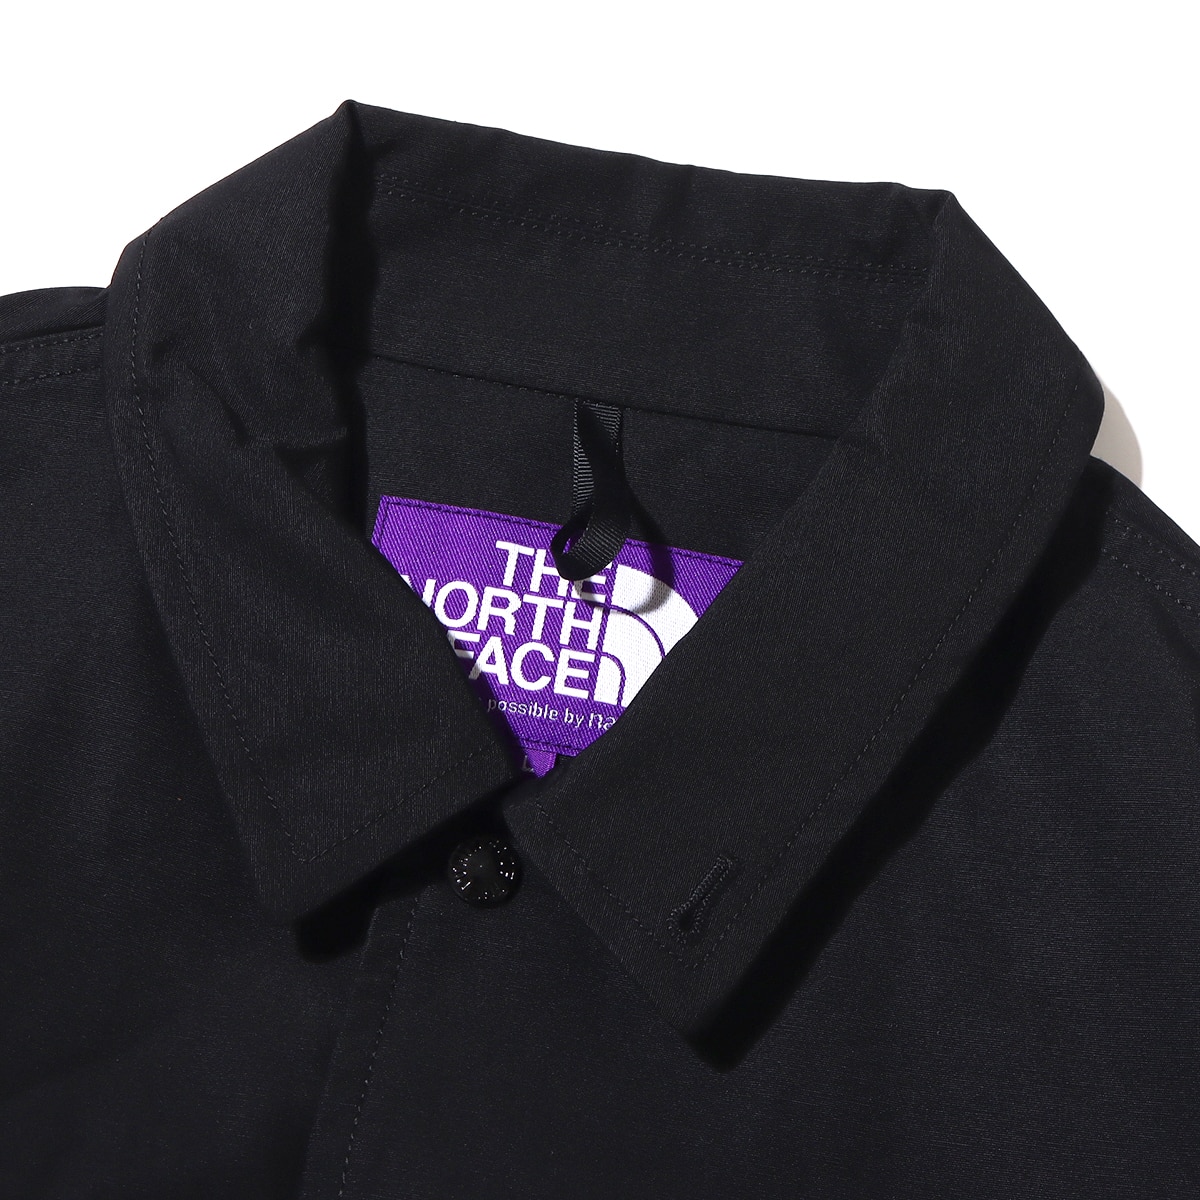 THE NORTH FACE PURPLE LABEL Mountain Wind Coach Jacket Black 23SS-I